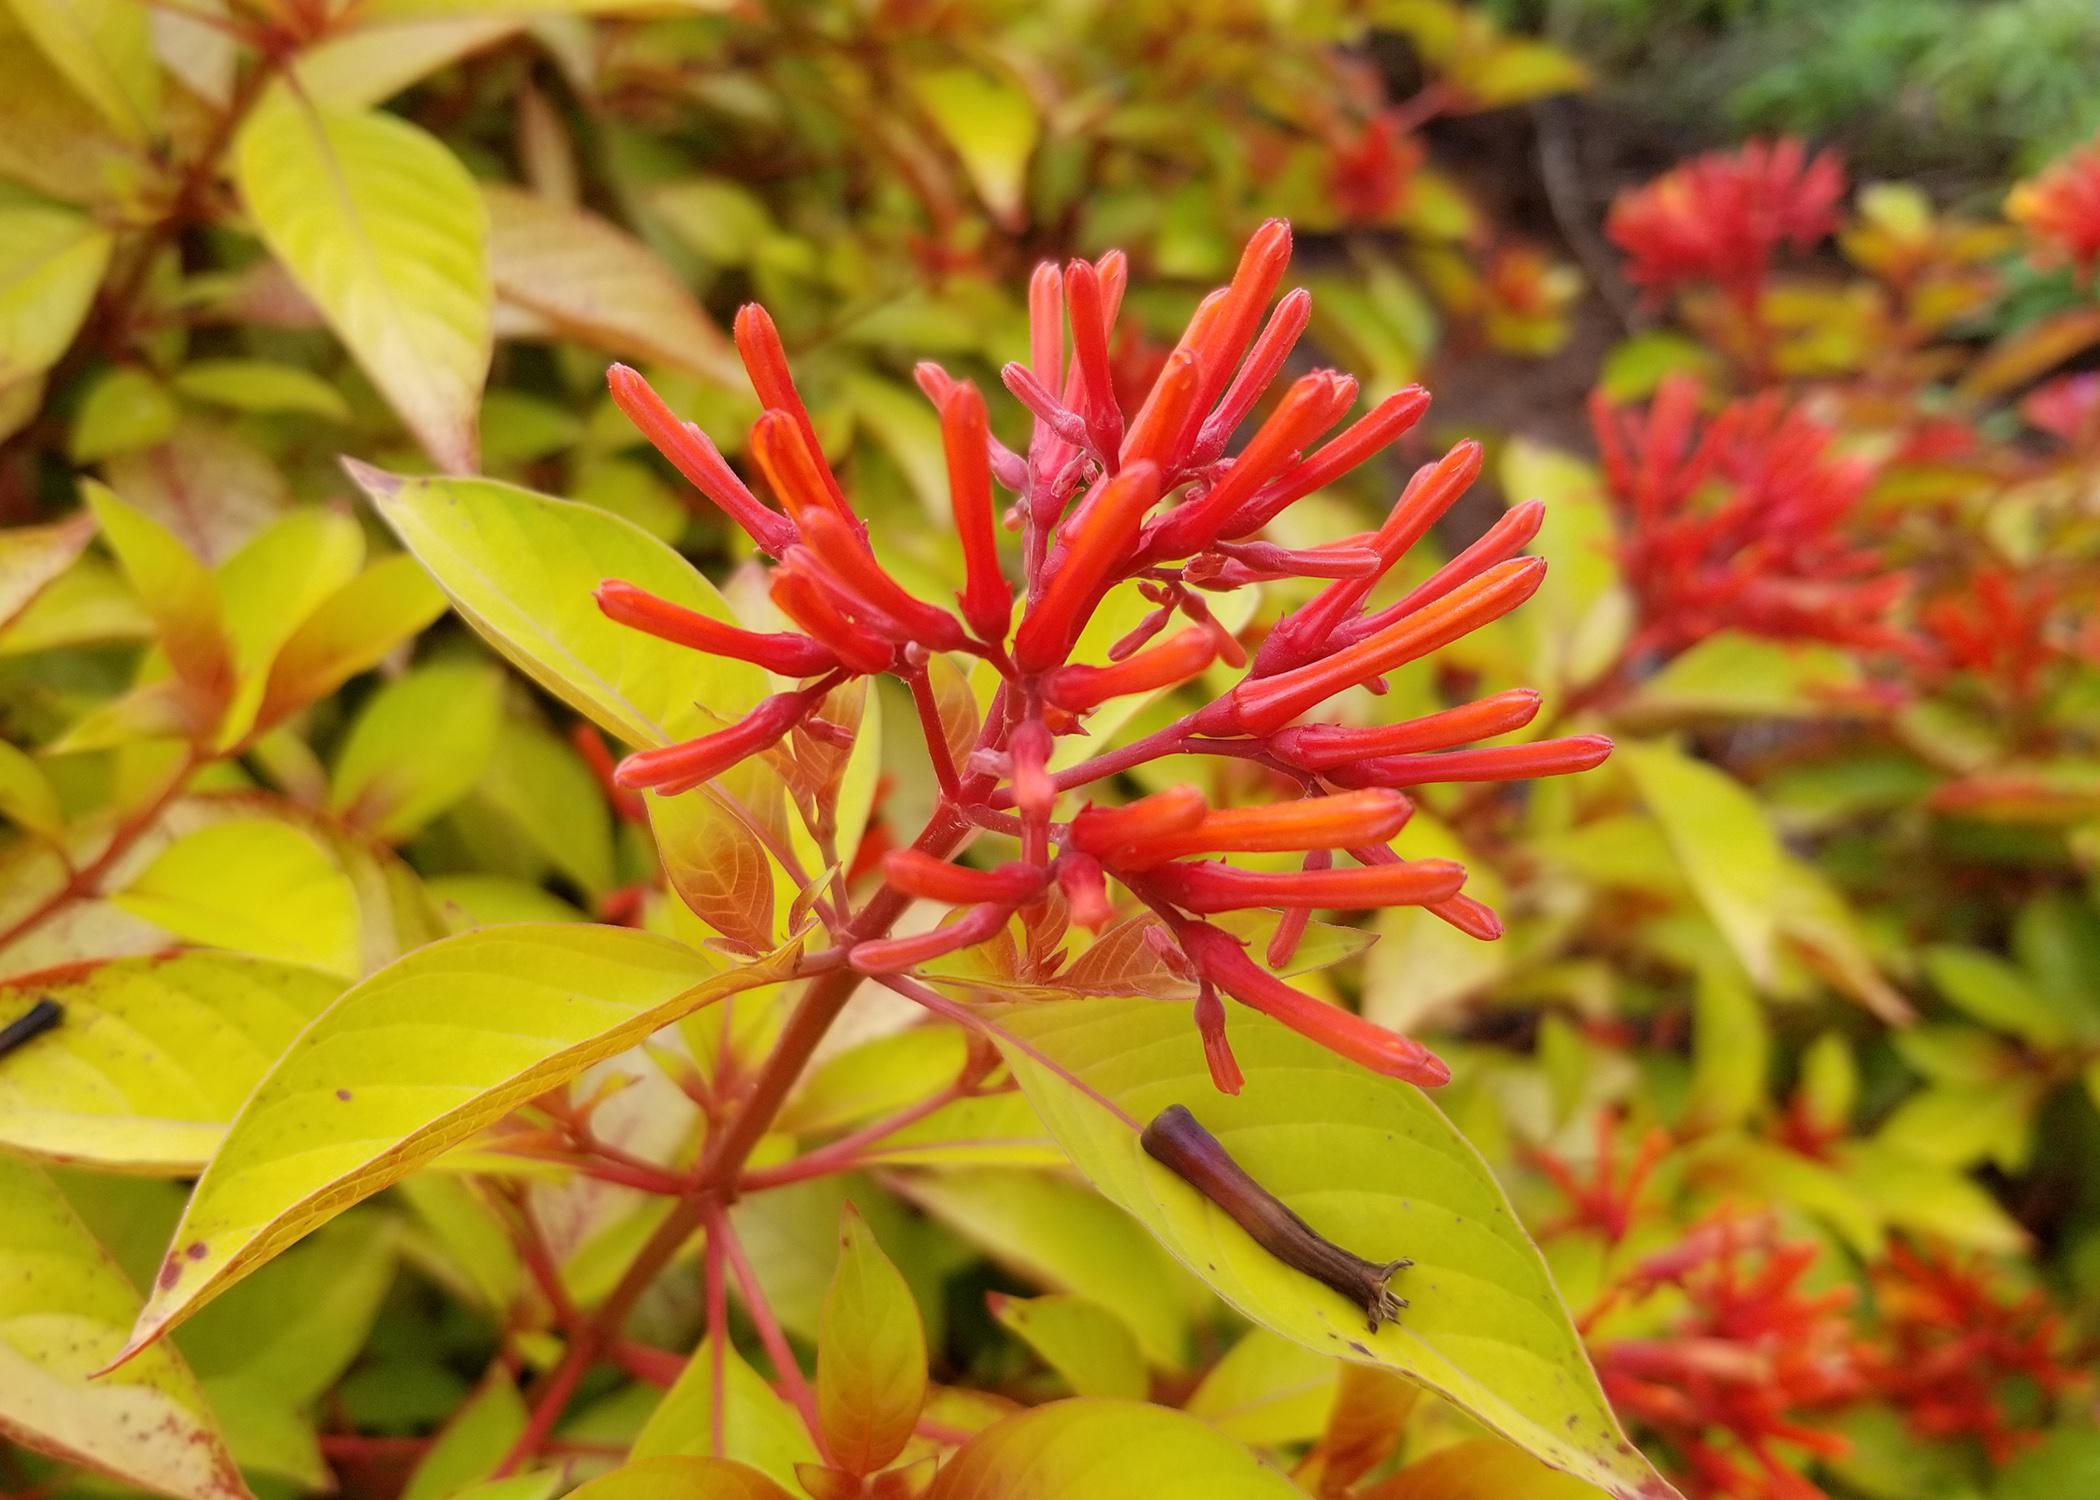 A round cluster of red, tubular flowers rises above a sea of lime green leaves.